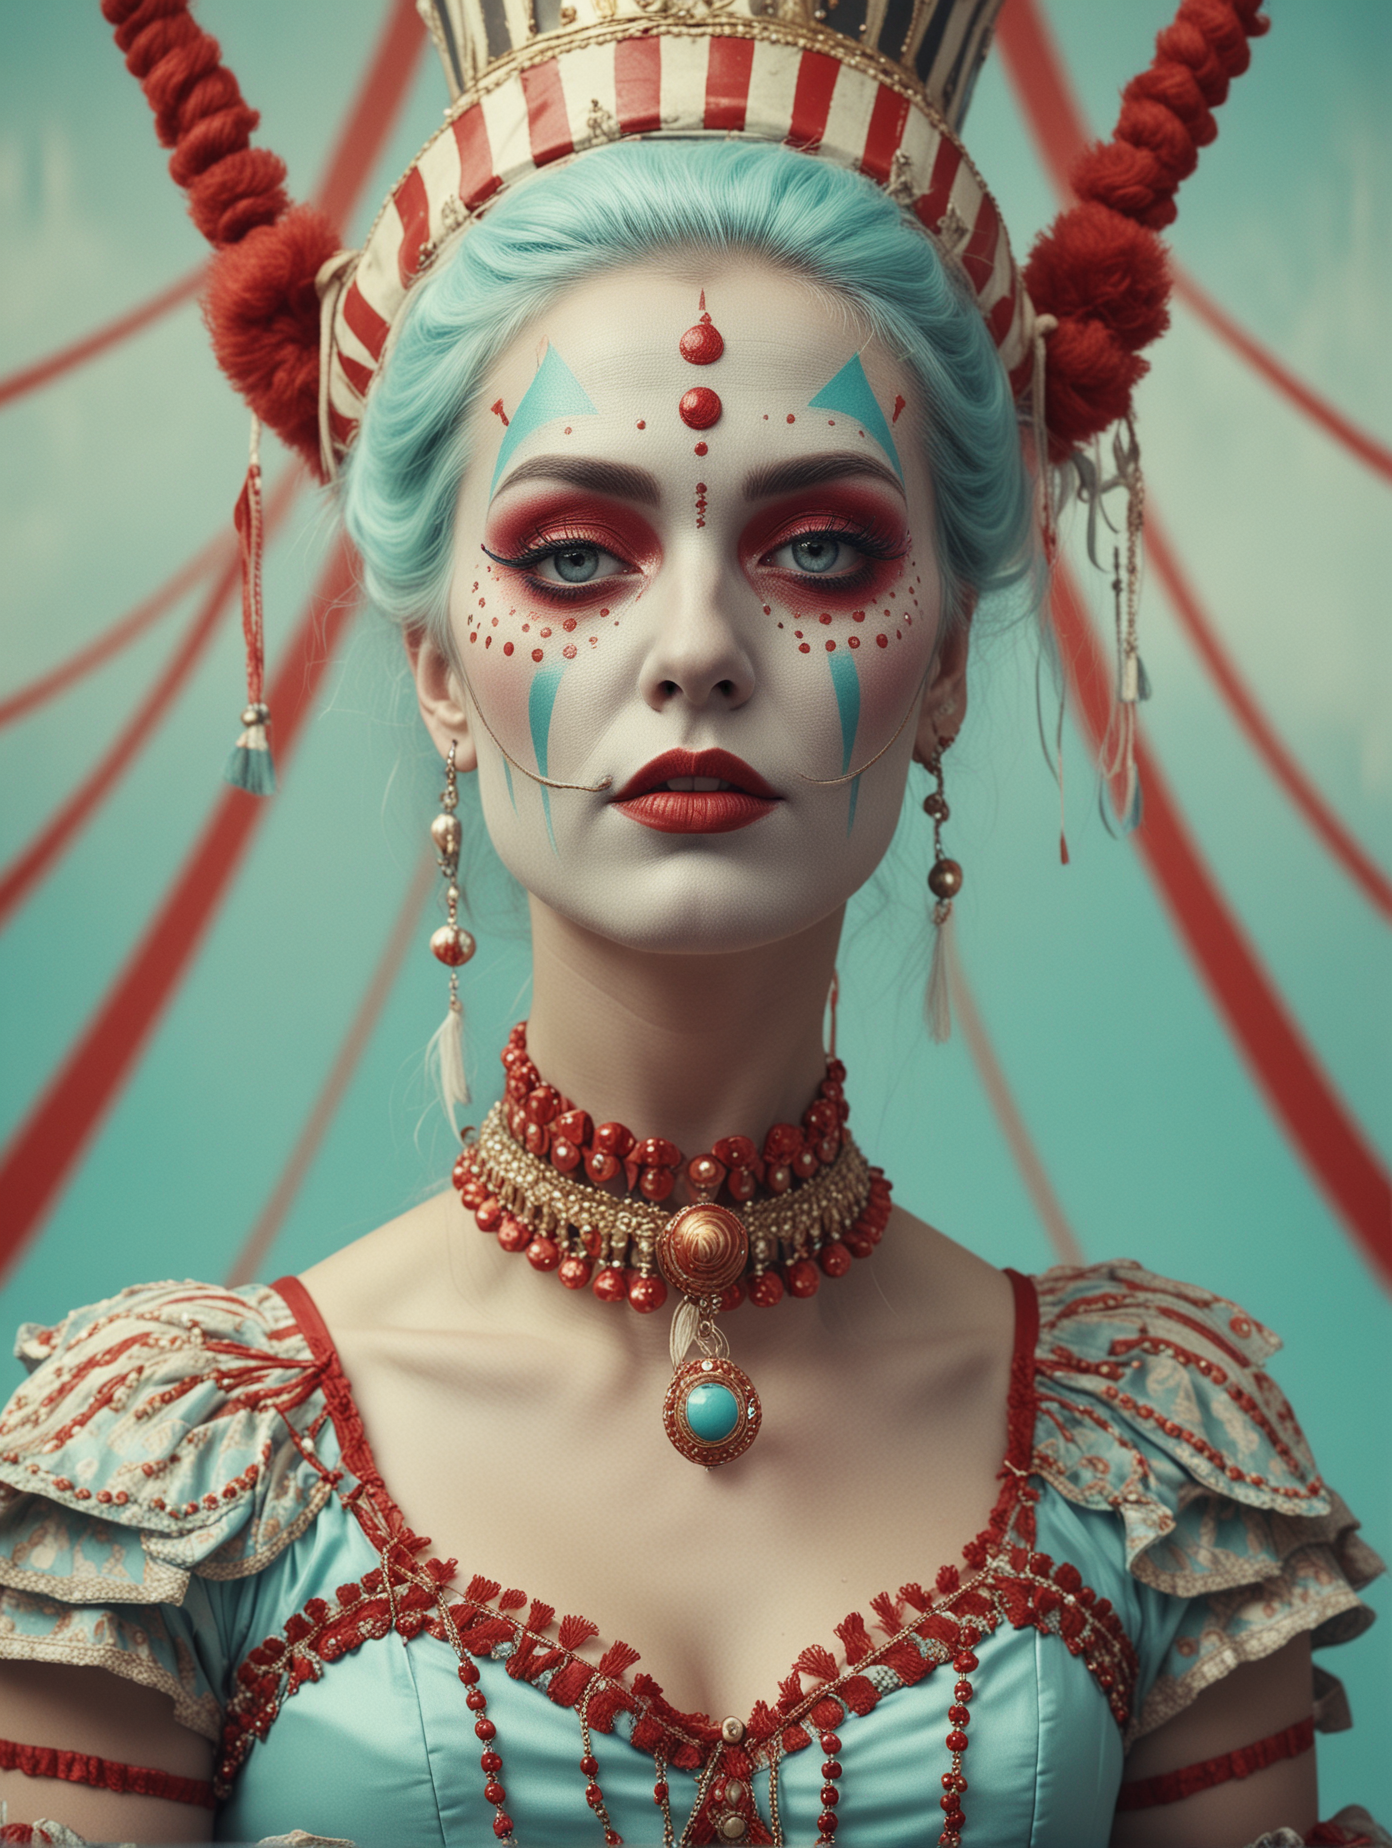 Whimsical Yet Eerie Circus Portrait with Natureinspired Details